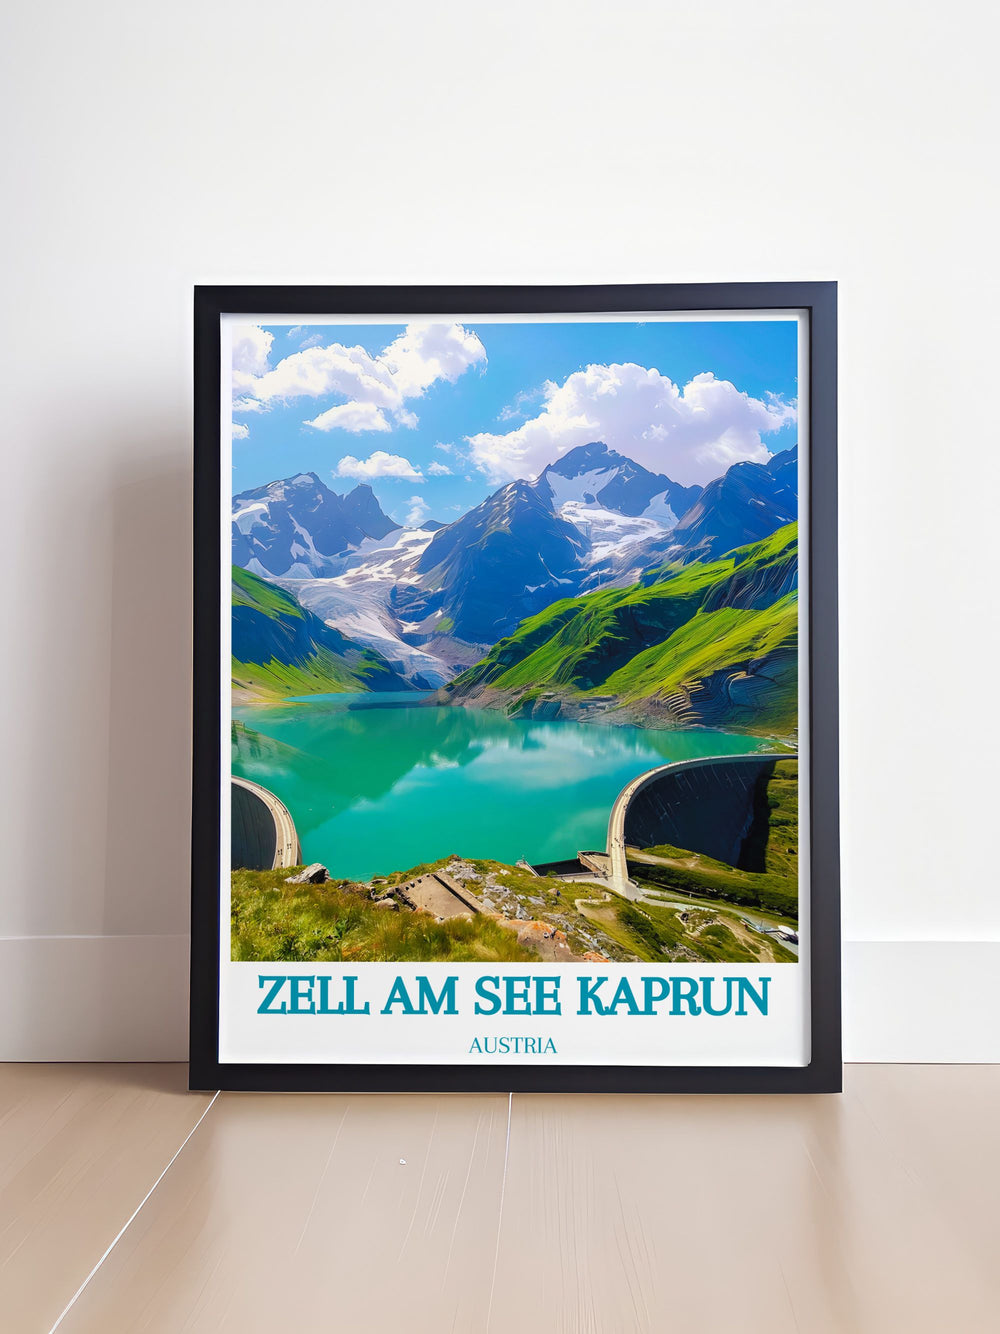 Home decor featuring the majestic Kaprun High Mountain Reservoirs. This print highlights the serene waters surrounded by towering alpine peaks, offering a blend of natural beauty and engineering marvel, ideal for adding a touch of tranquility to your living space.